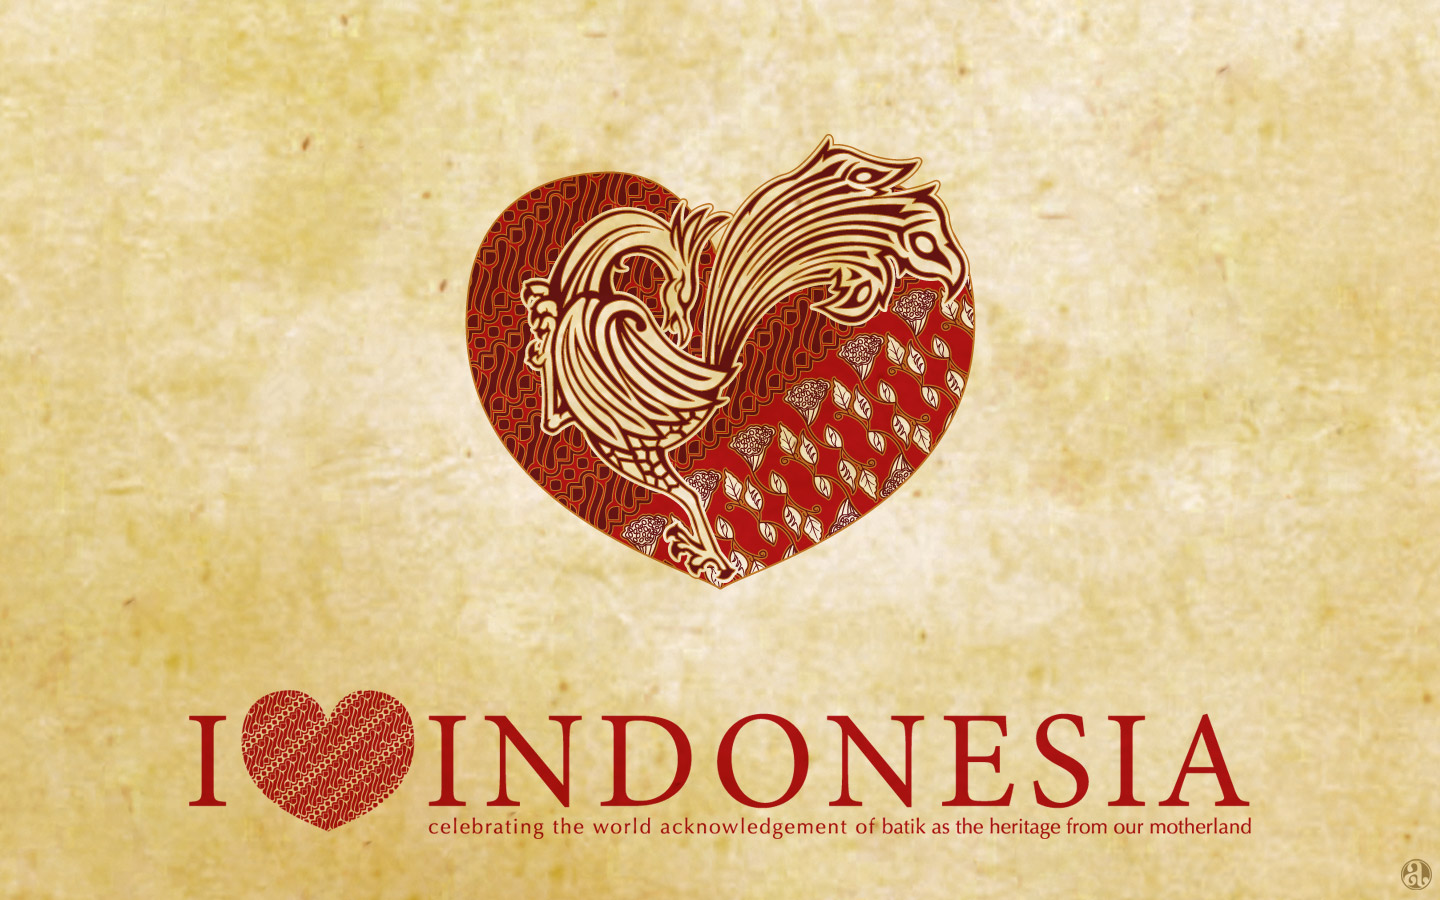 Indonesia comprises 17508 islands. With a population of around 238 million 